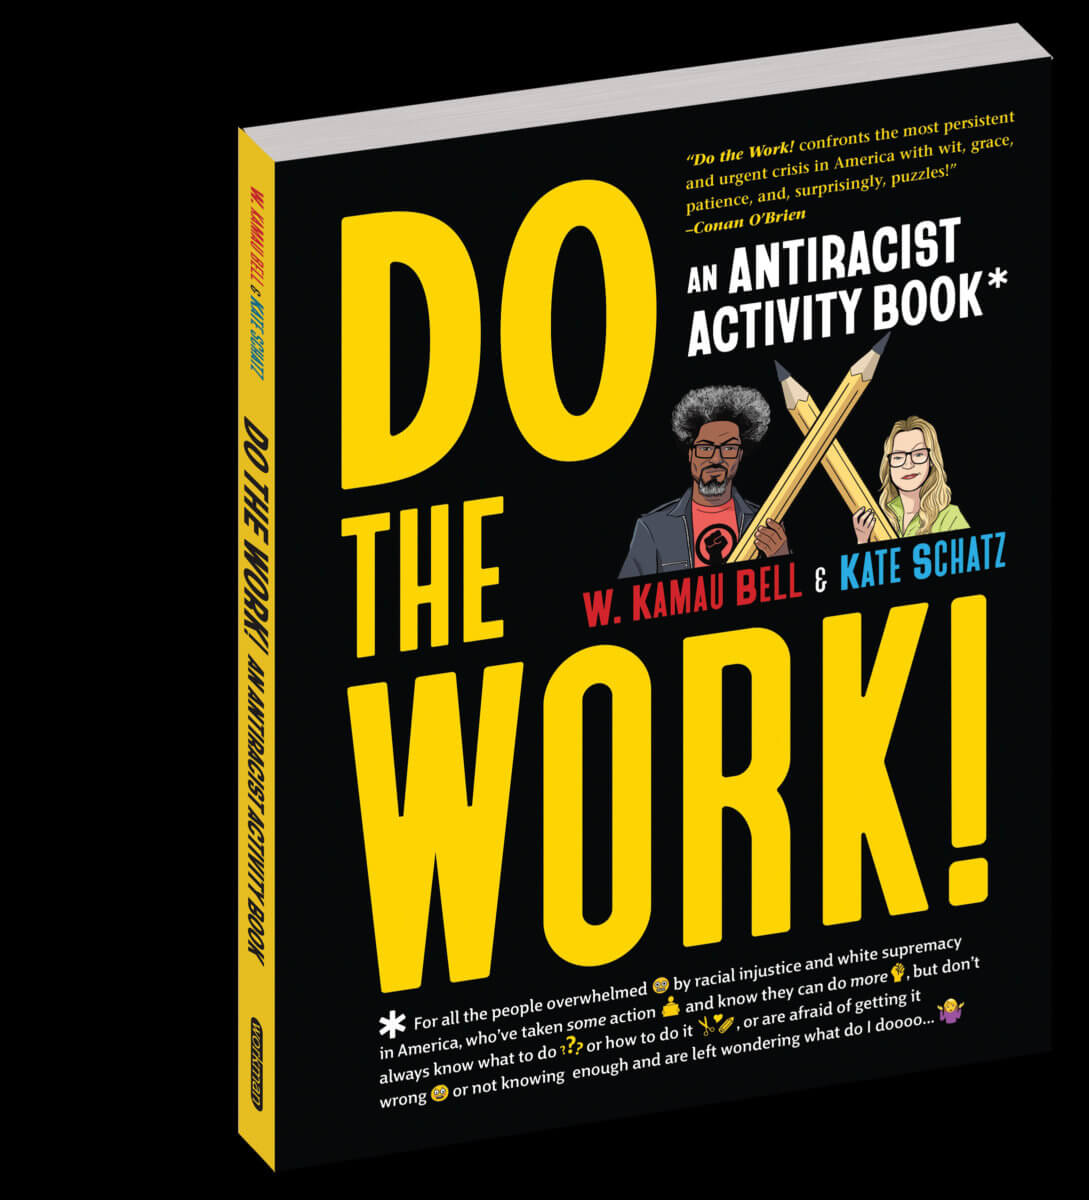 Book cover of 'Do The Work' by W. Kamau Bell and Kate Schatz.